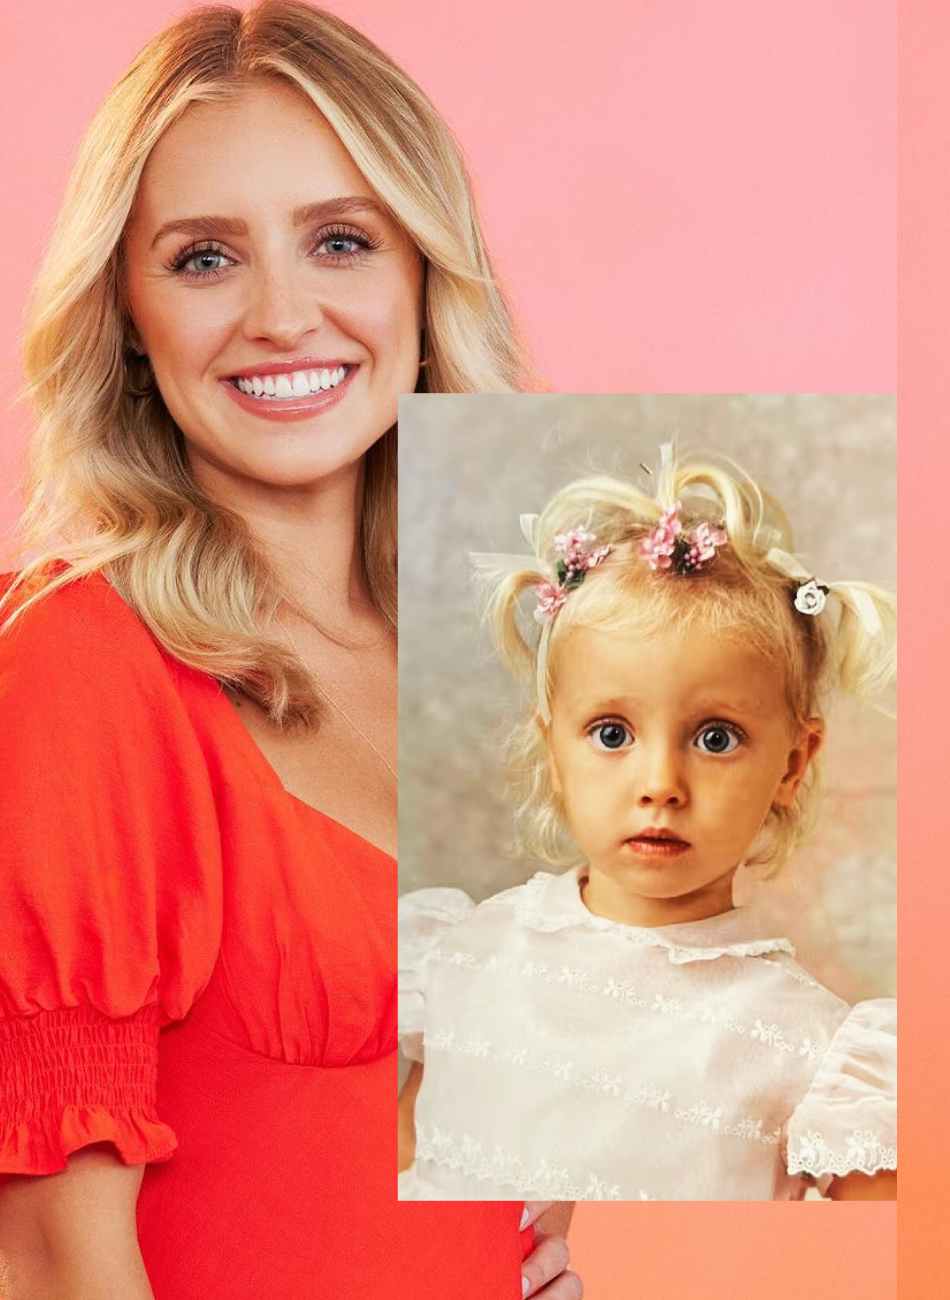 Bachelor Final Four Baby Pics Speculation